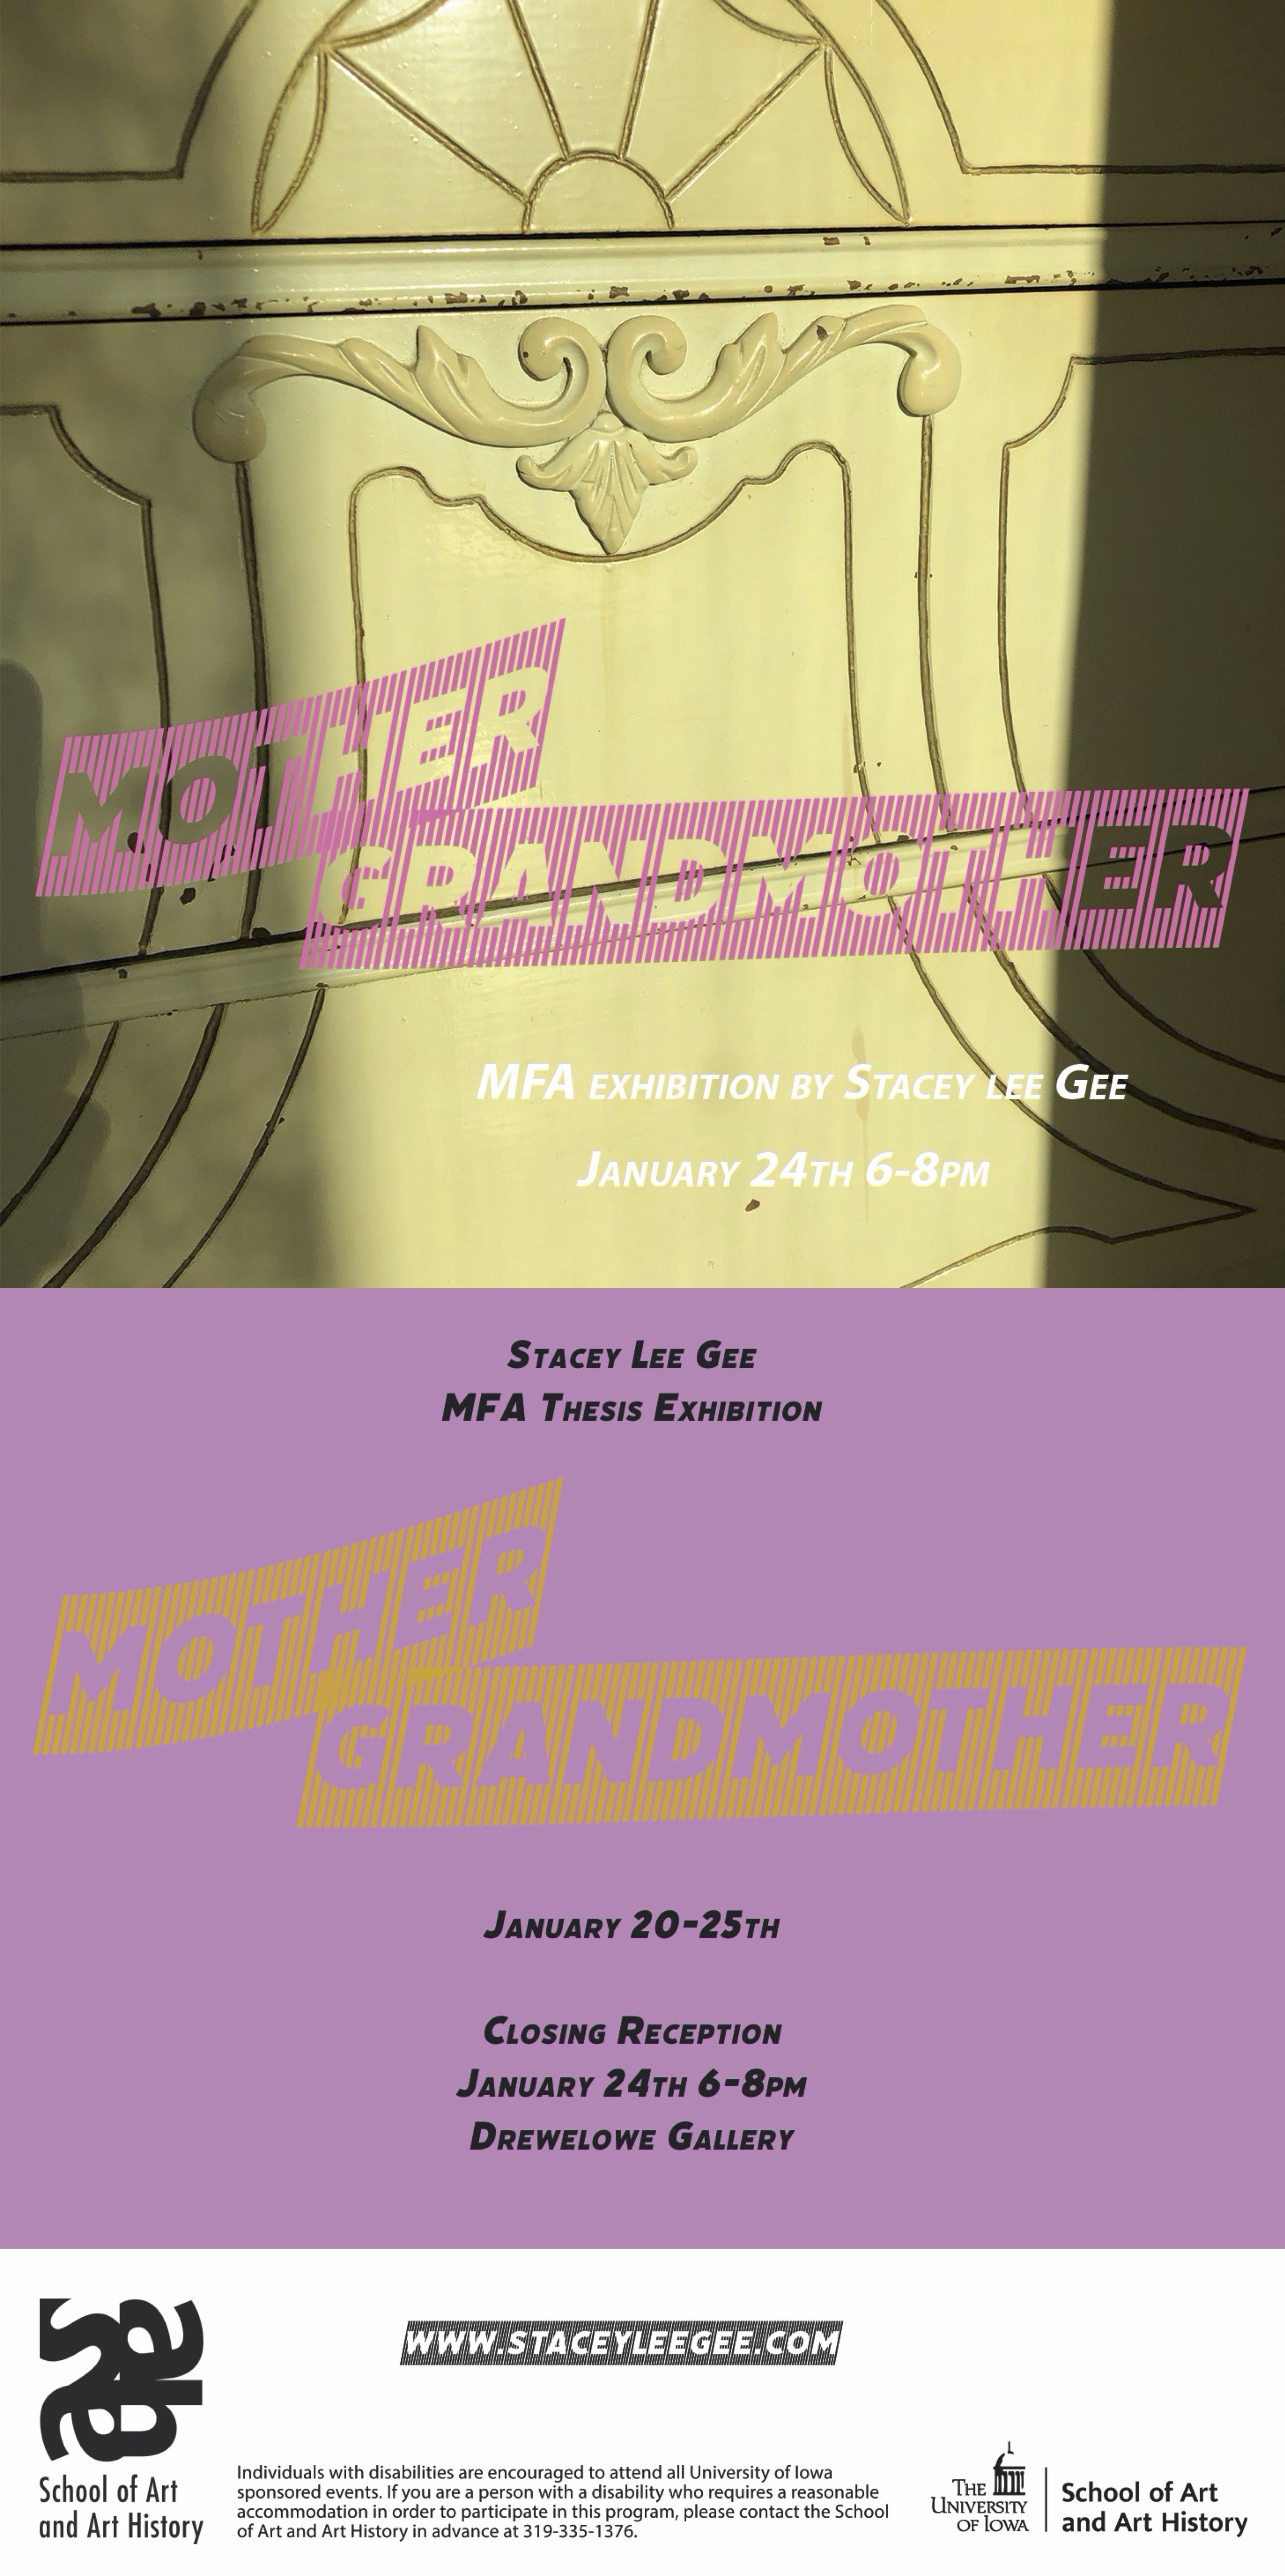 Mother Grandmother MDA Exhibition by Stacey Lee Gee